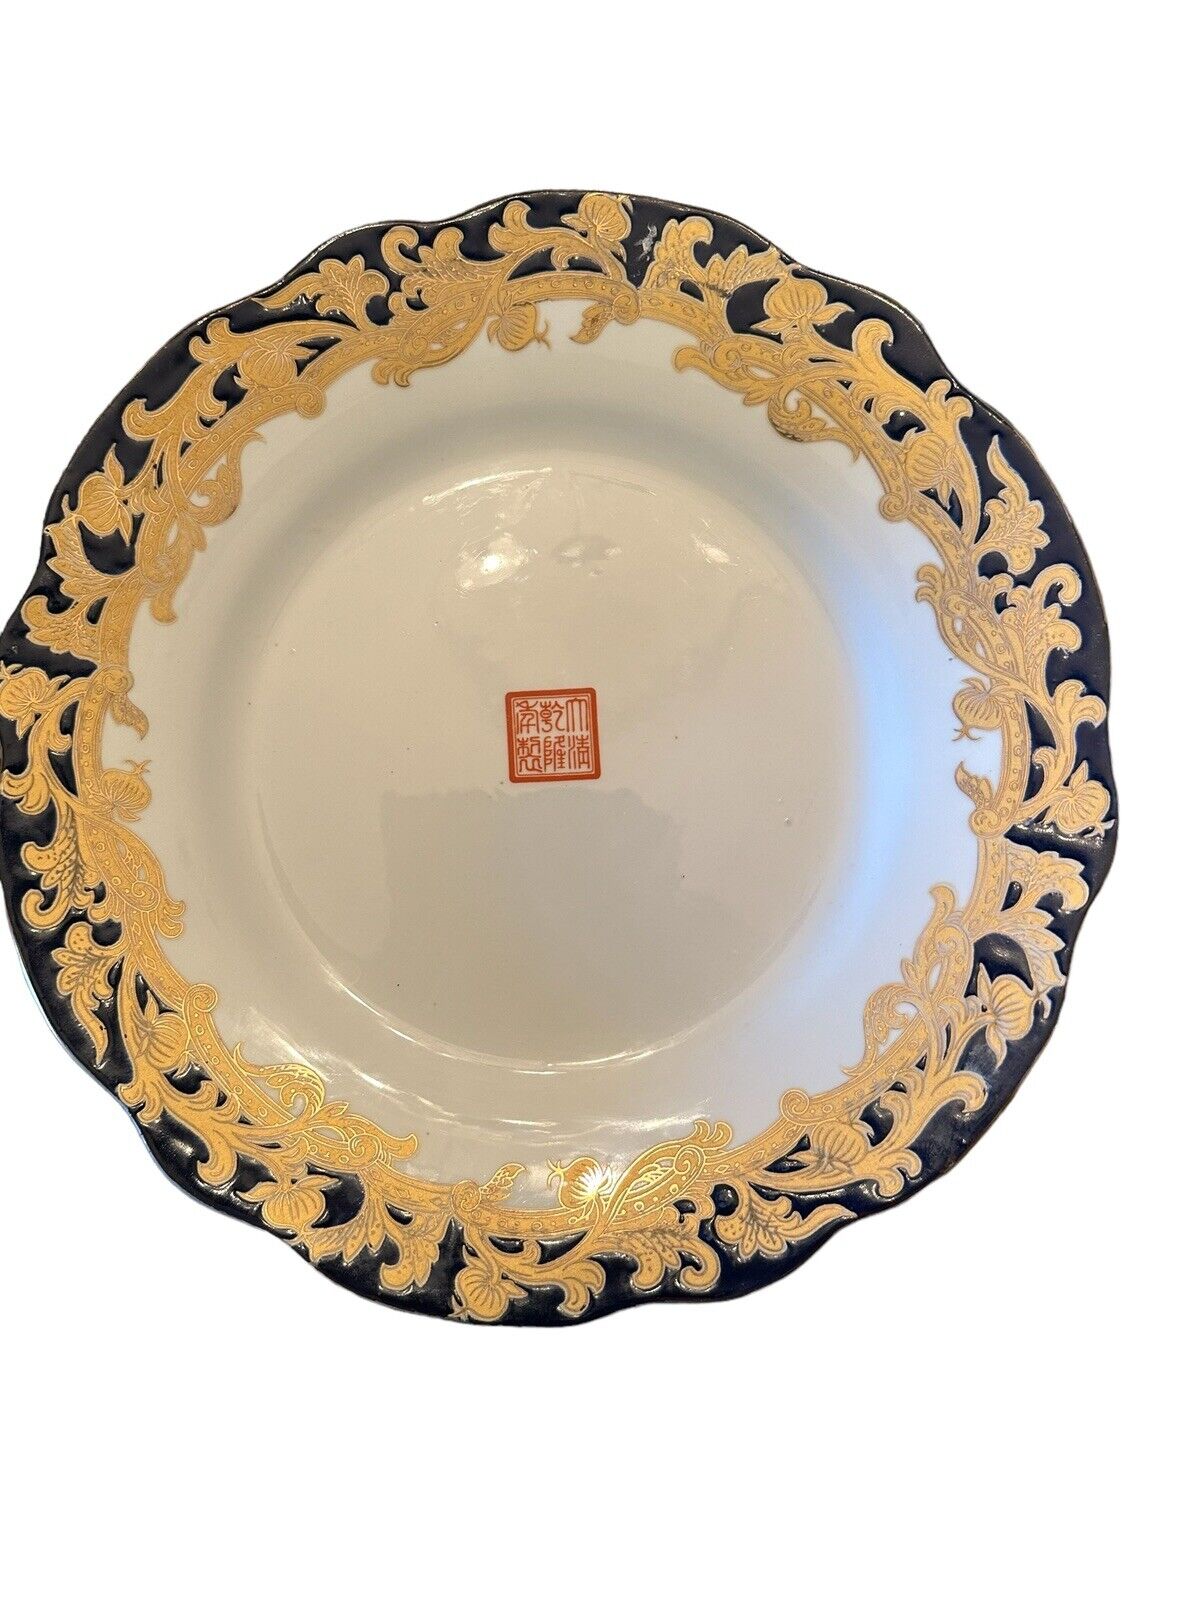 Beautiful Chinese Ceramic Plate With Dark Blue And Gold Trim 11